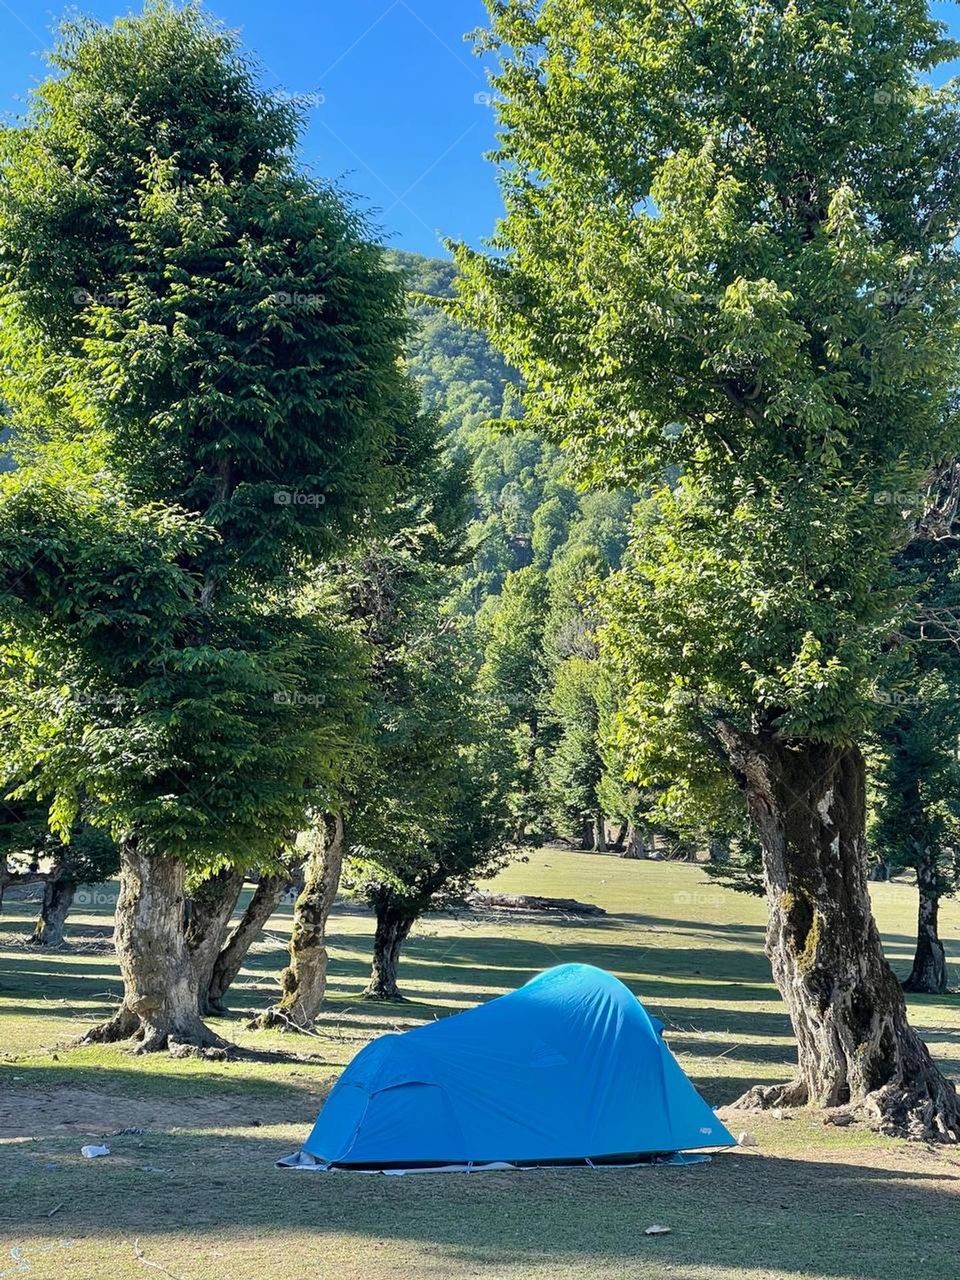 Best camping for ever, Iran, Golestan